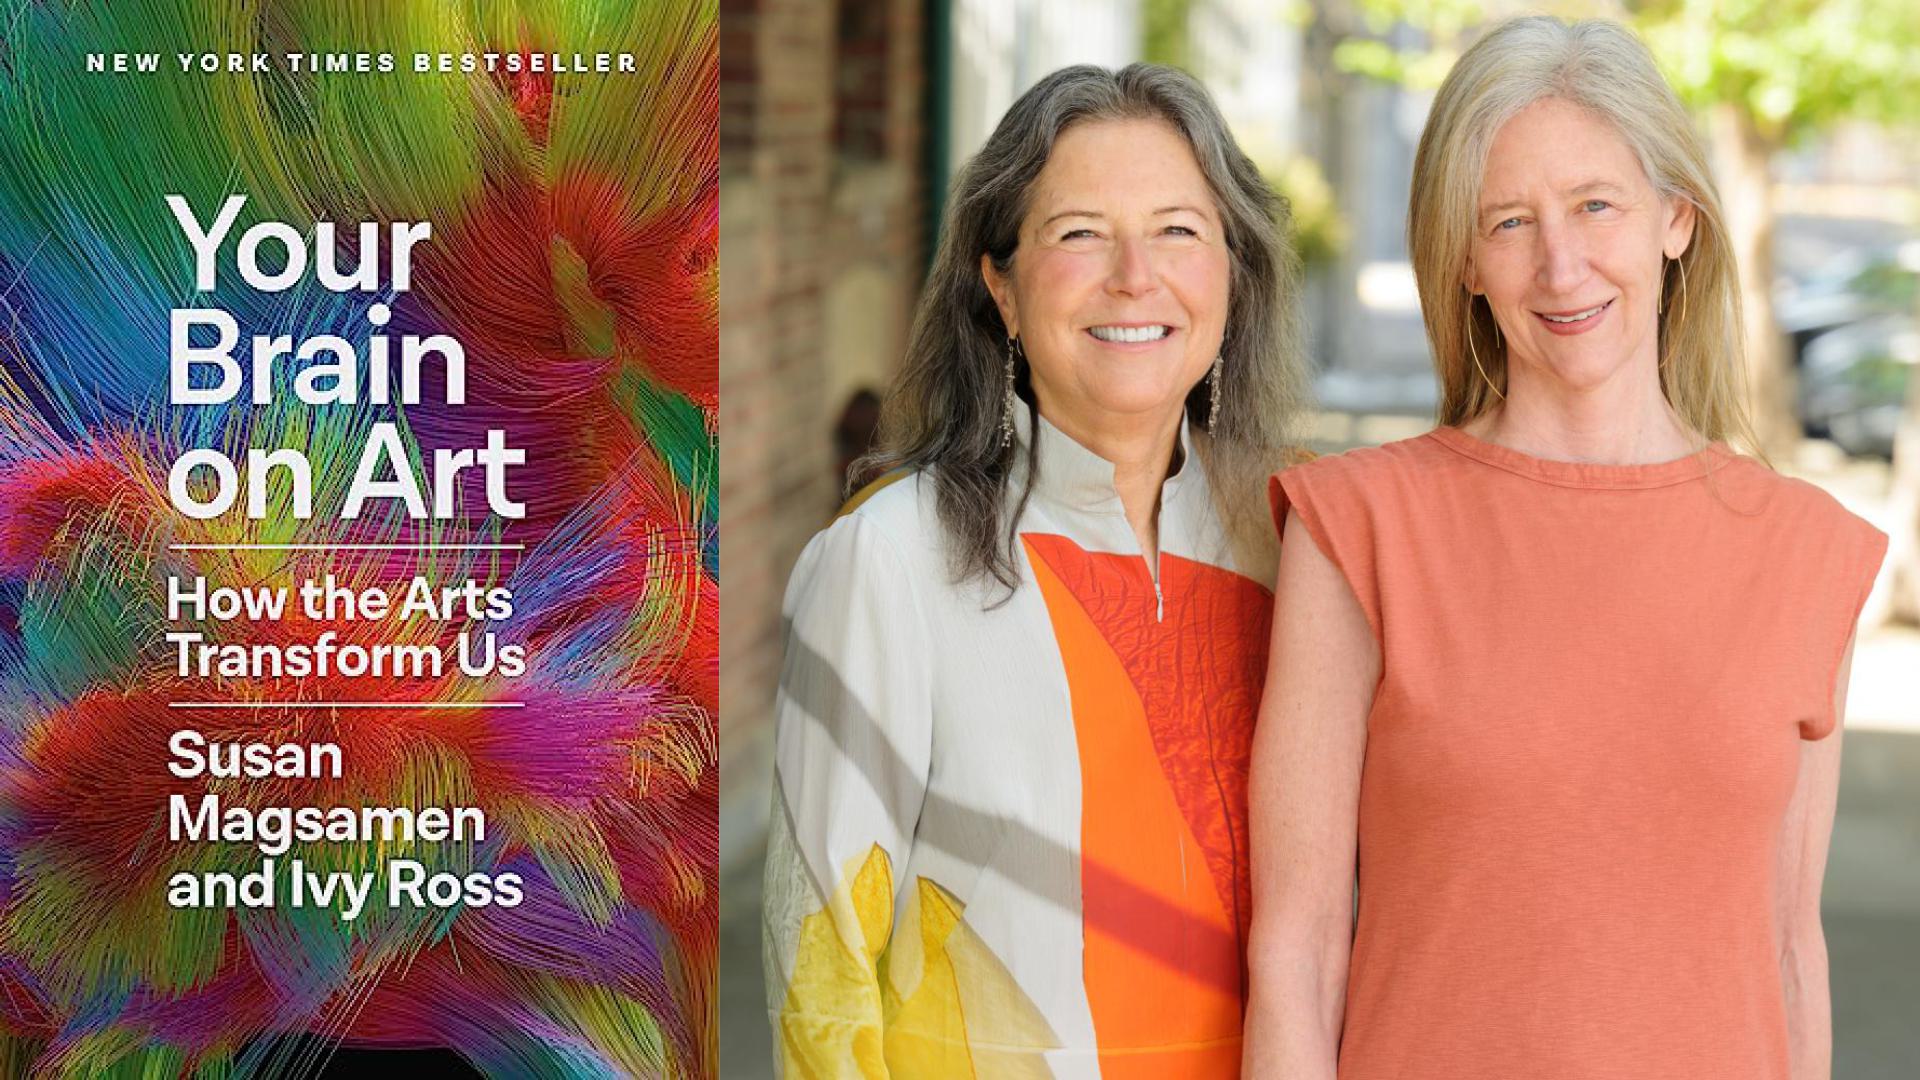 "Your Brain on Art: How the Arts Transform Us" by Susan Magsamen and Ivy Ross book cover